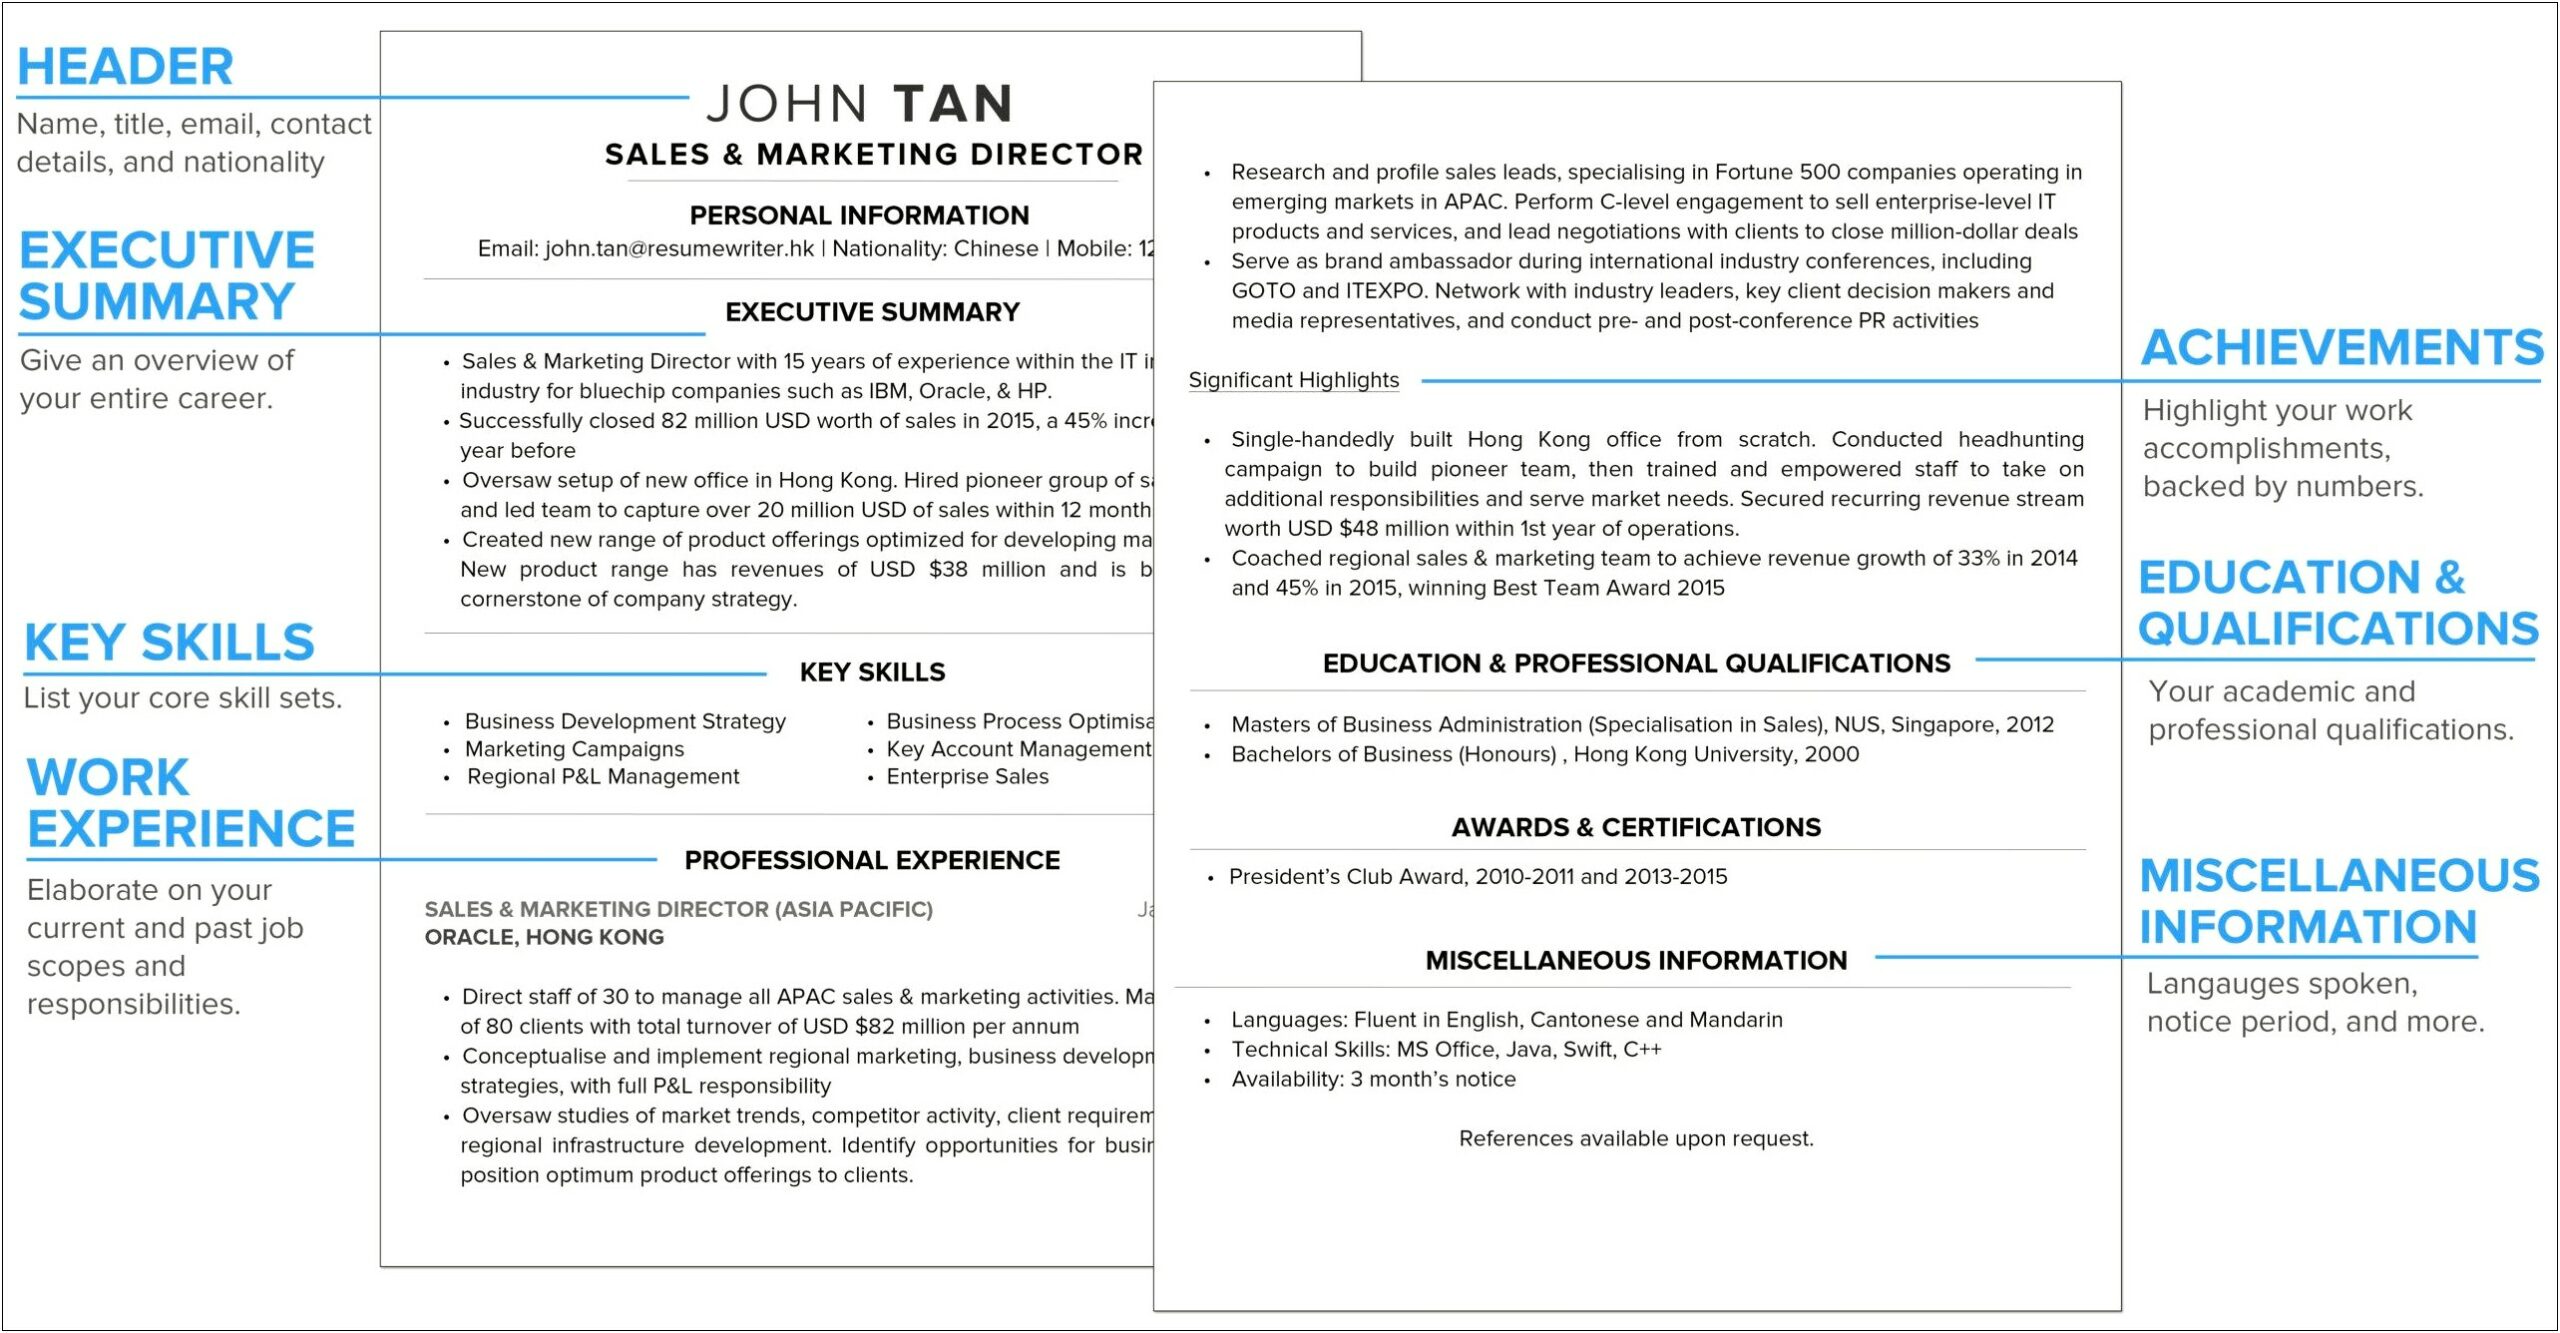 Where To Put Current Education On Resume